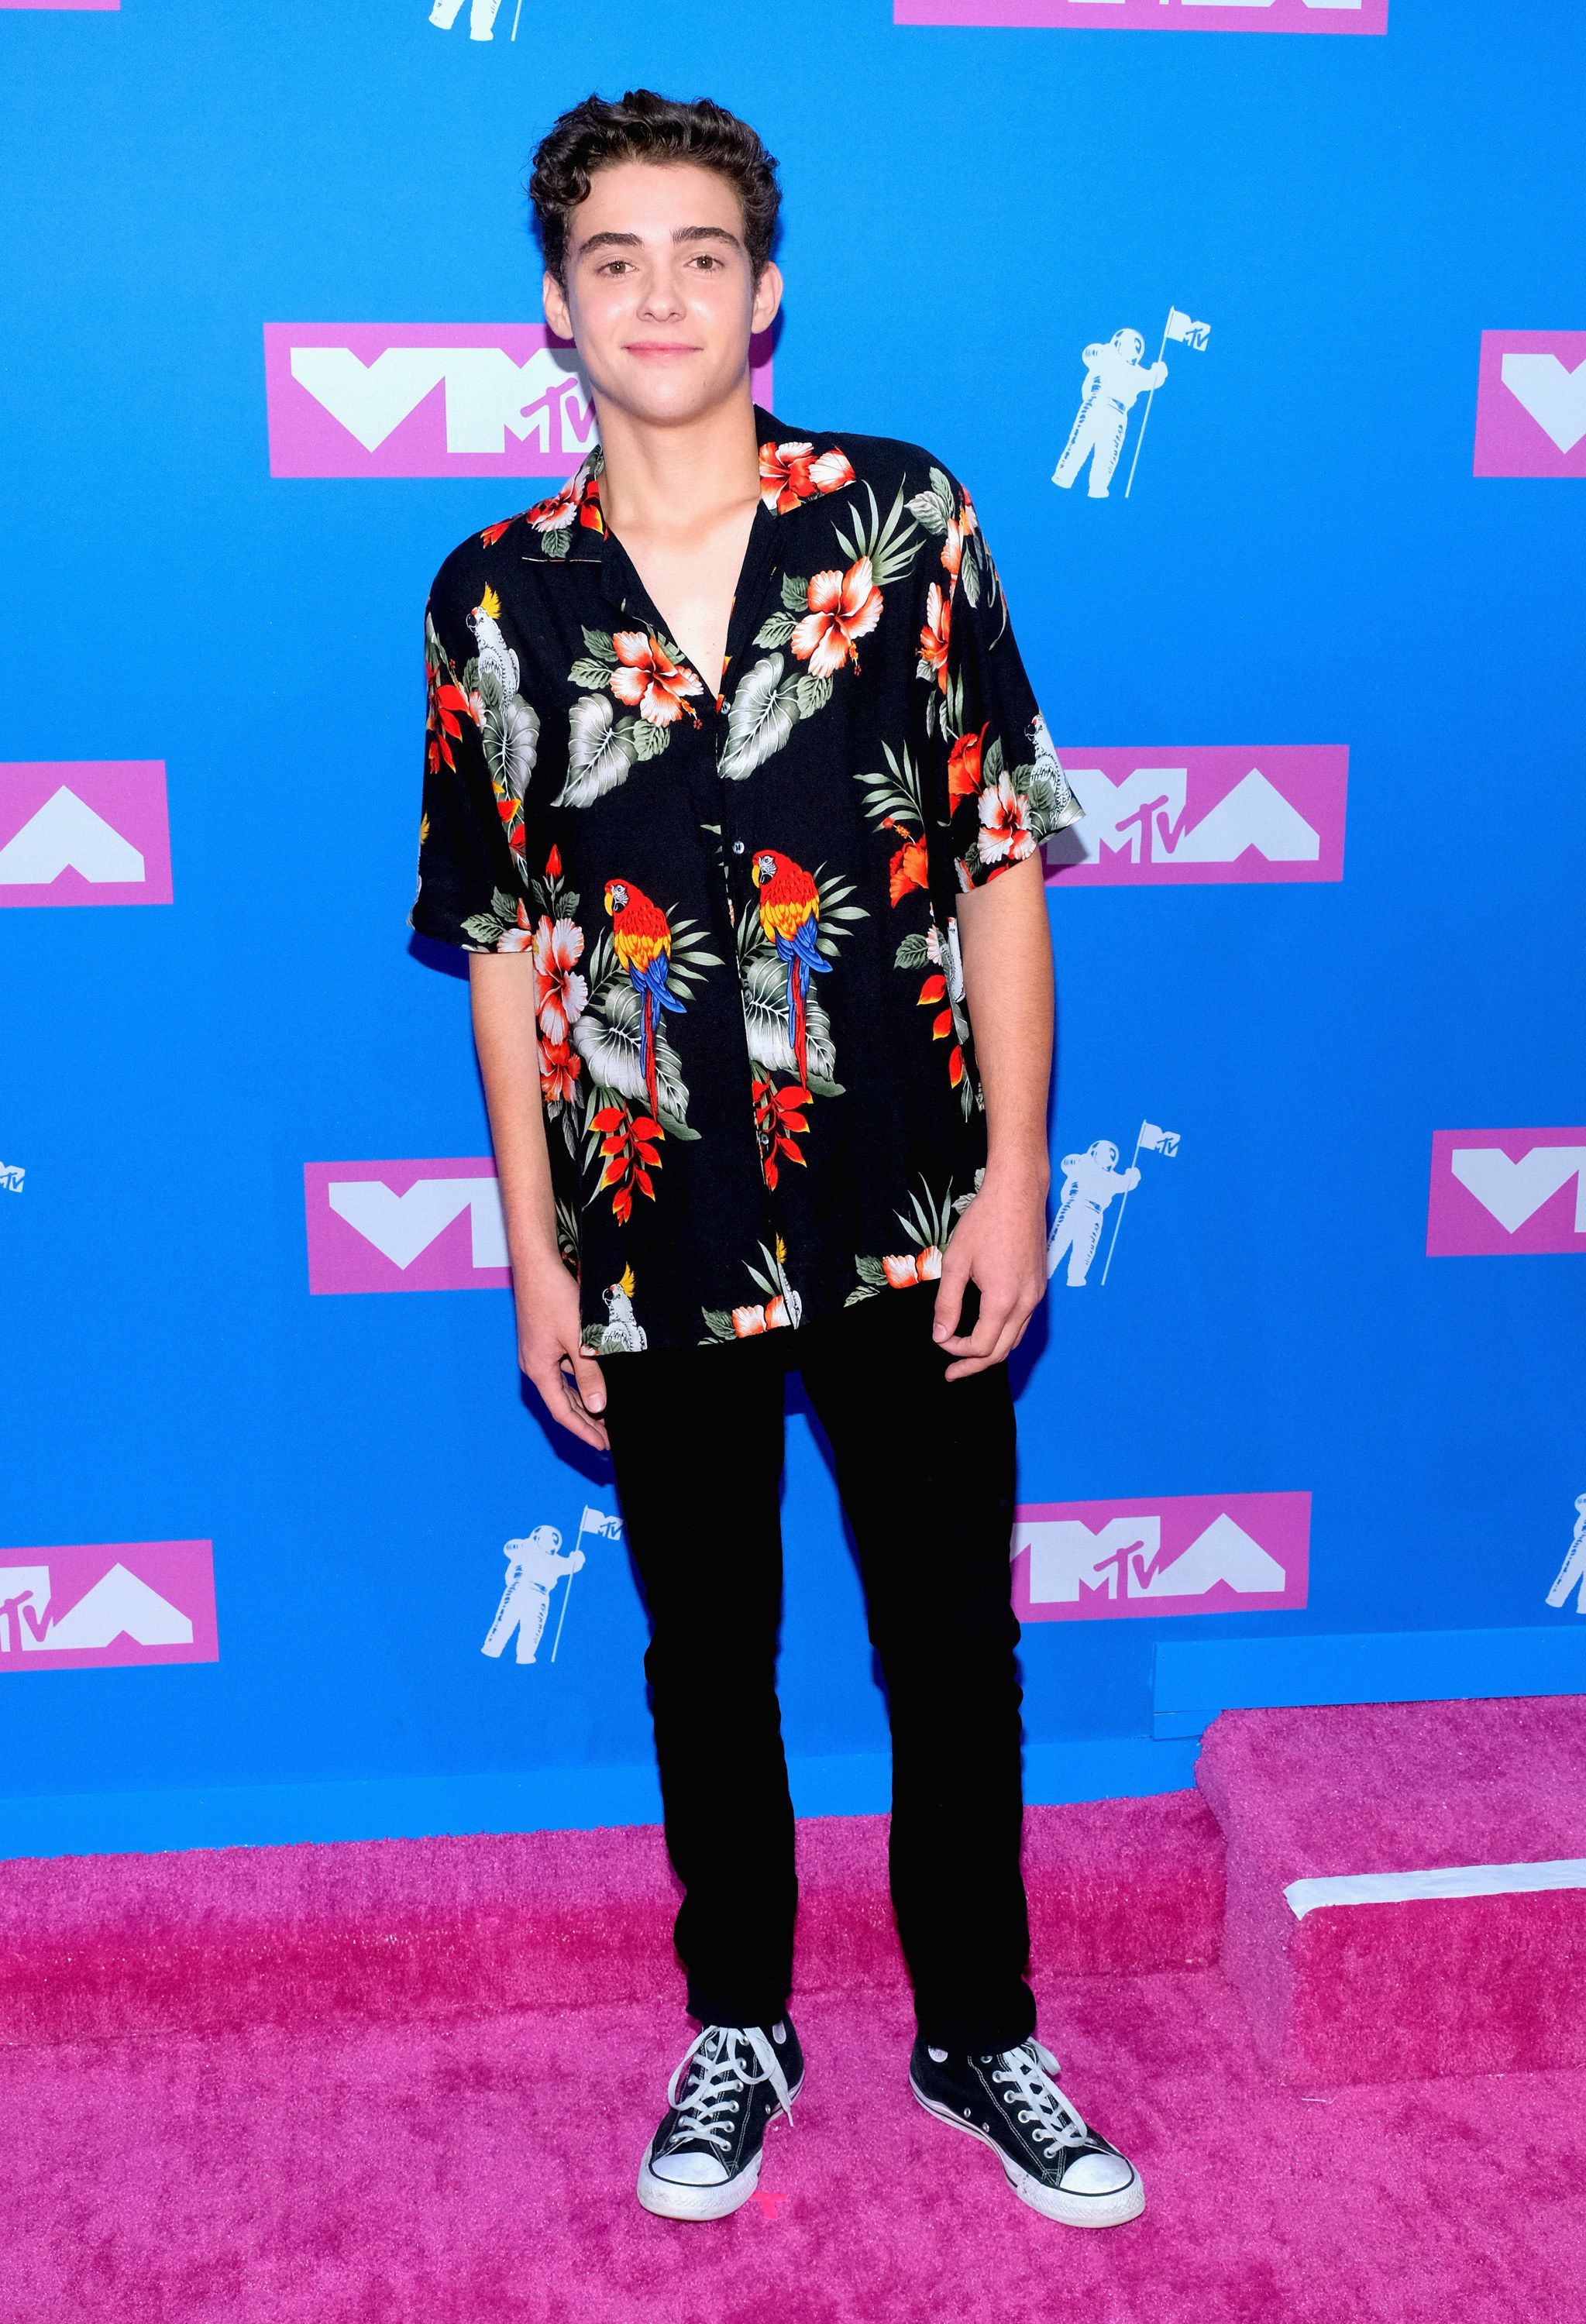 MTV VMAs 2018: Fashion—Live From the Red Carpet in 2019